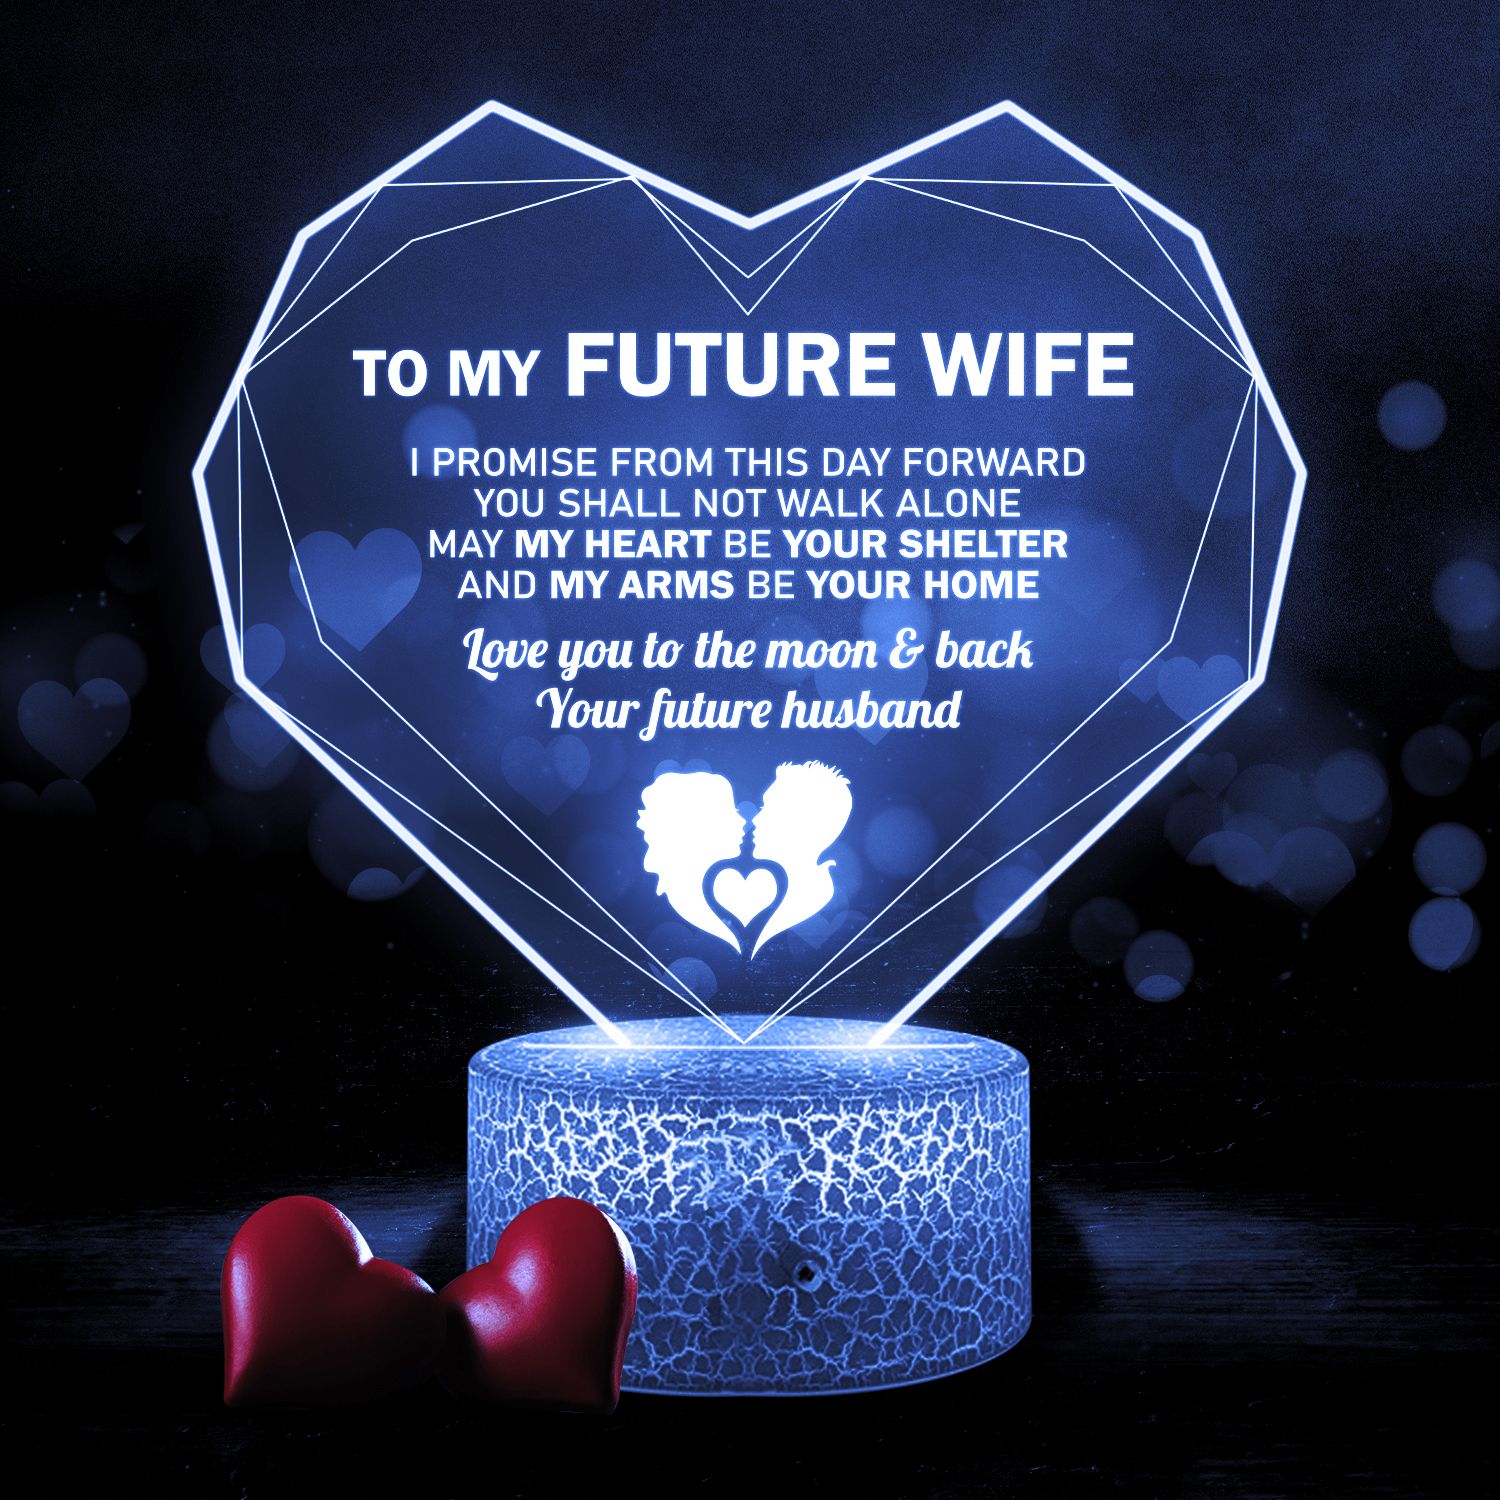 Heart Led Light - Family - To My Future Wife - Love You To The Moon & Back - Glca25008